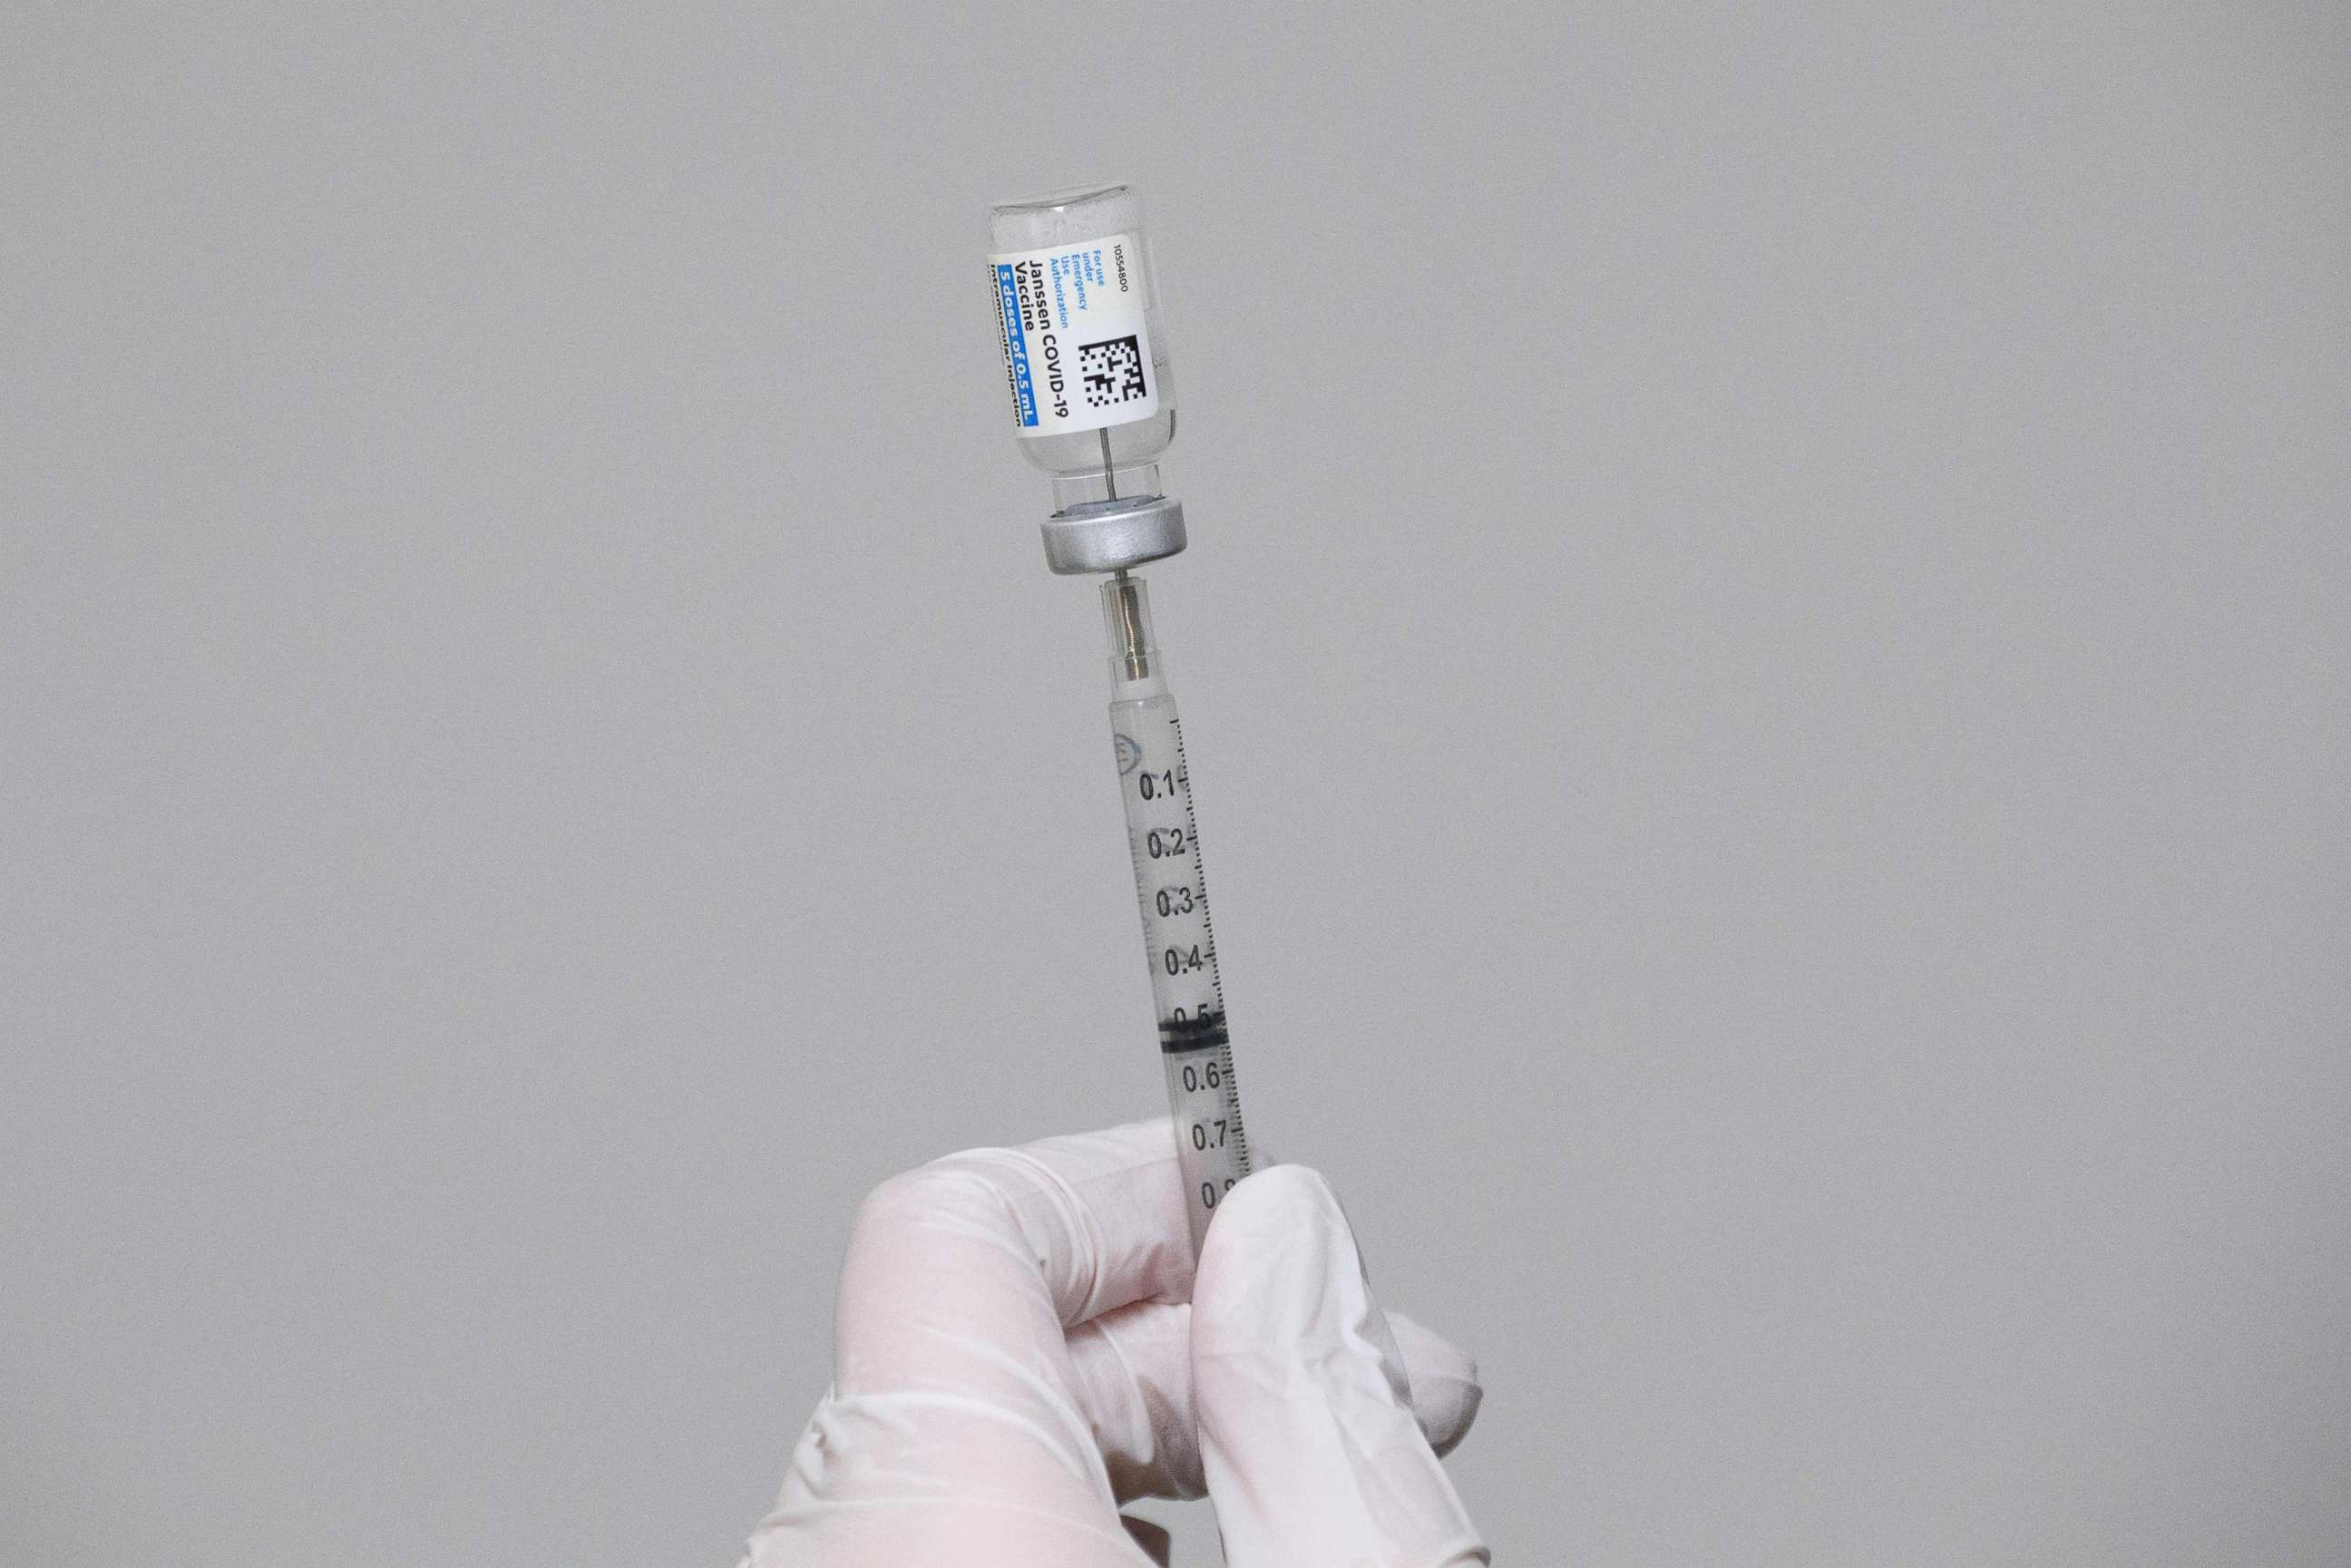 PHOTO: A syringe is filled with a dose of the Johnson & Johnson Janssen COVID-19 vaccine at a vaccination site, March 13, 2021m in Delano, Calif.